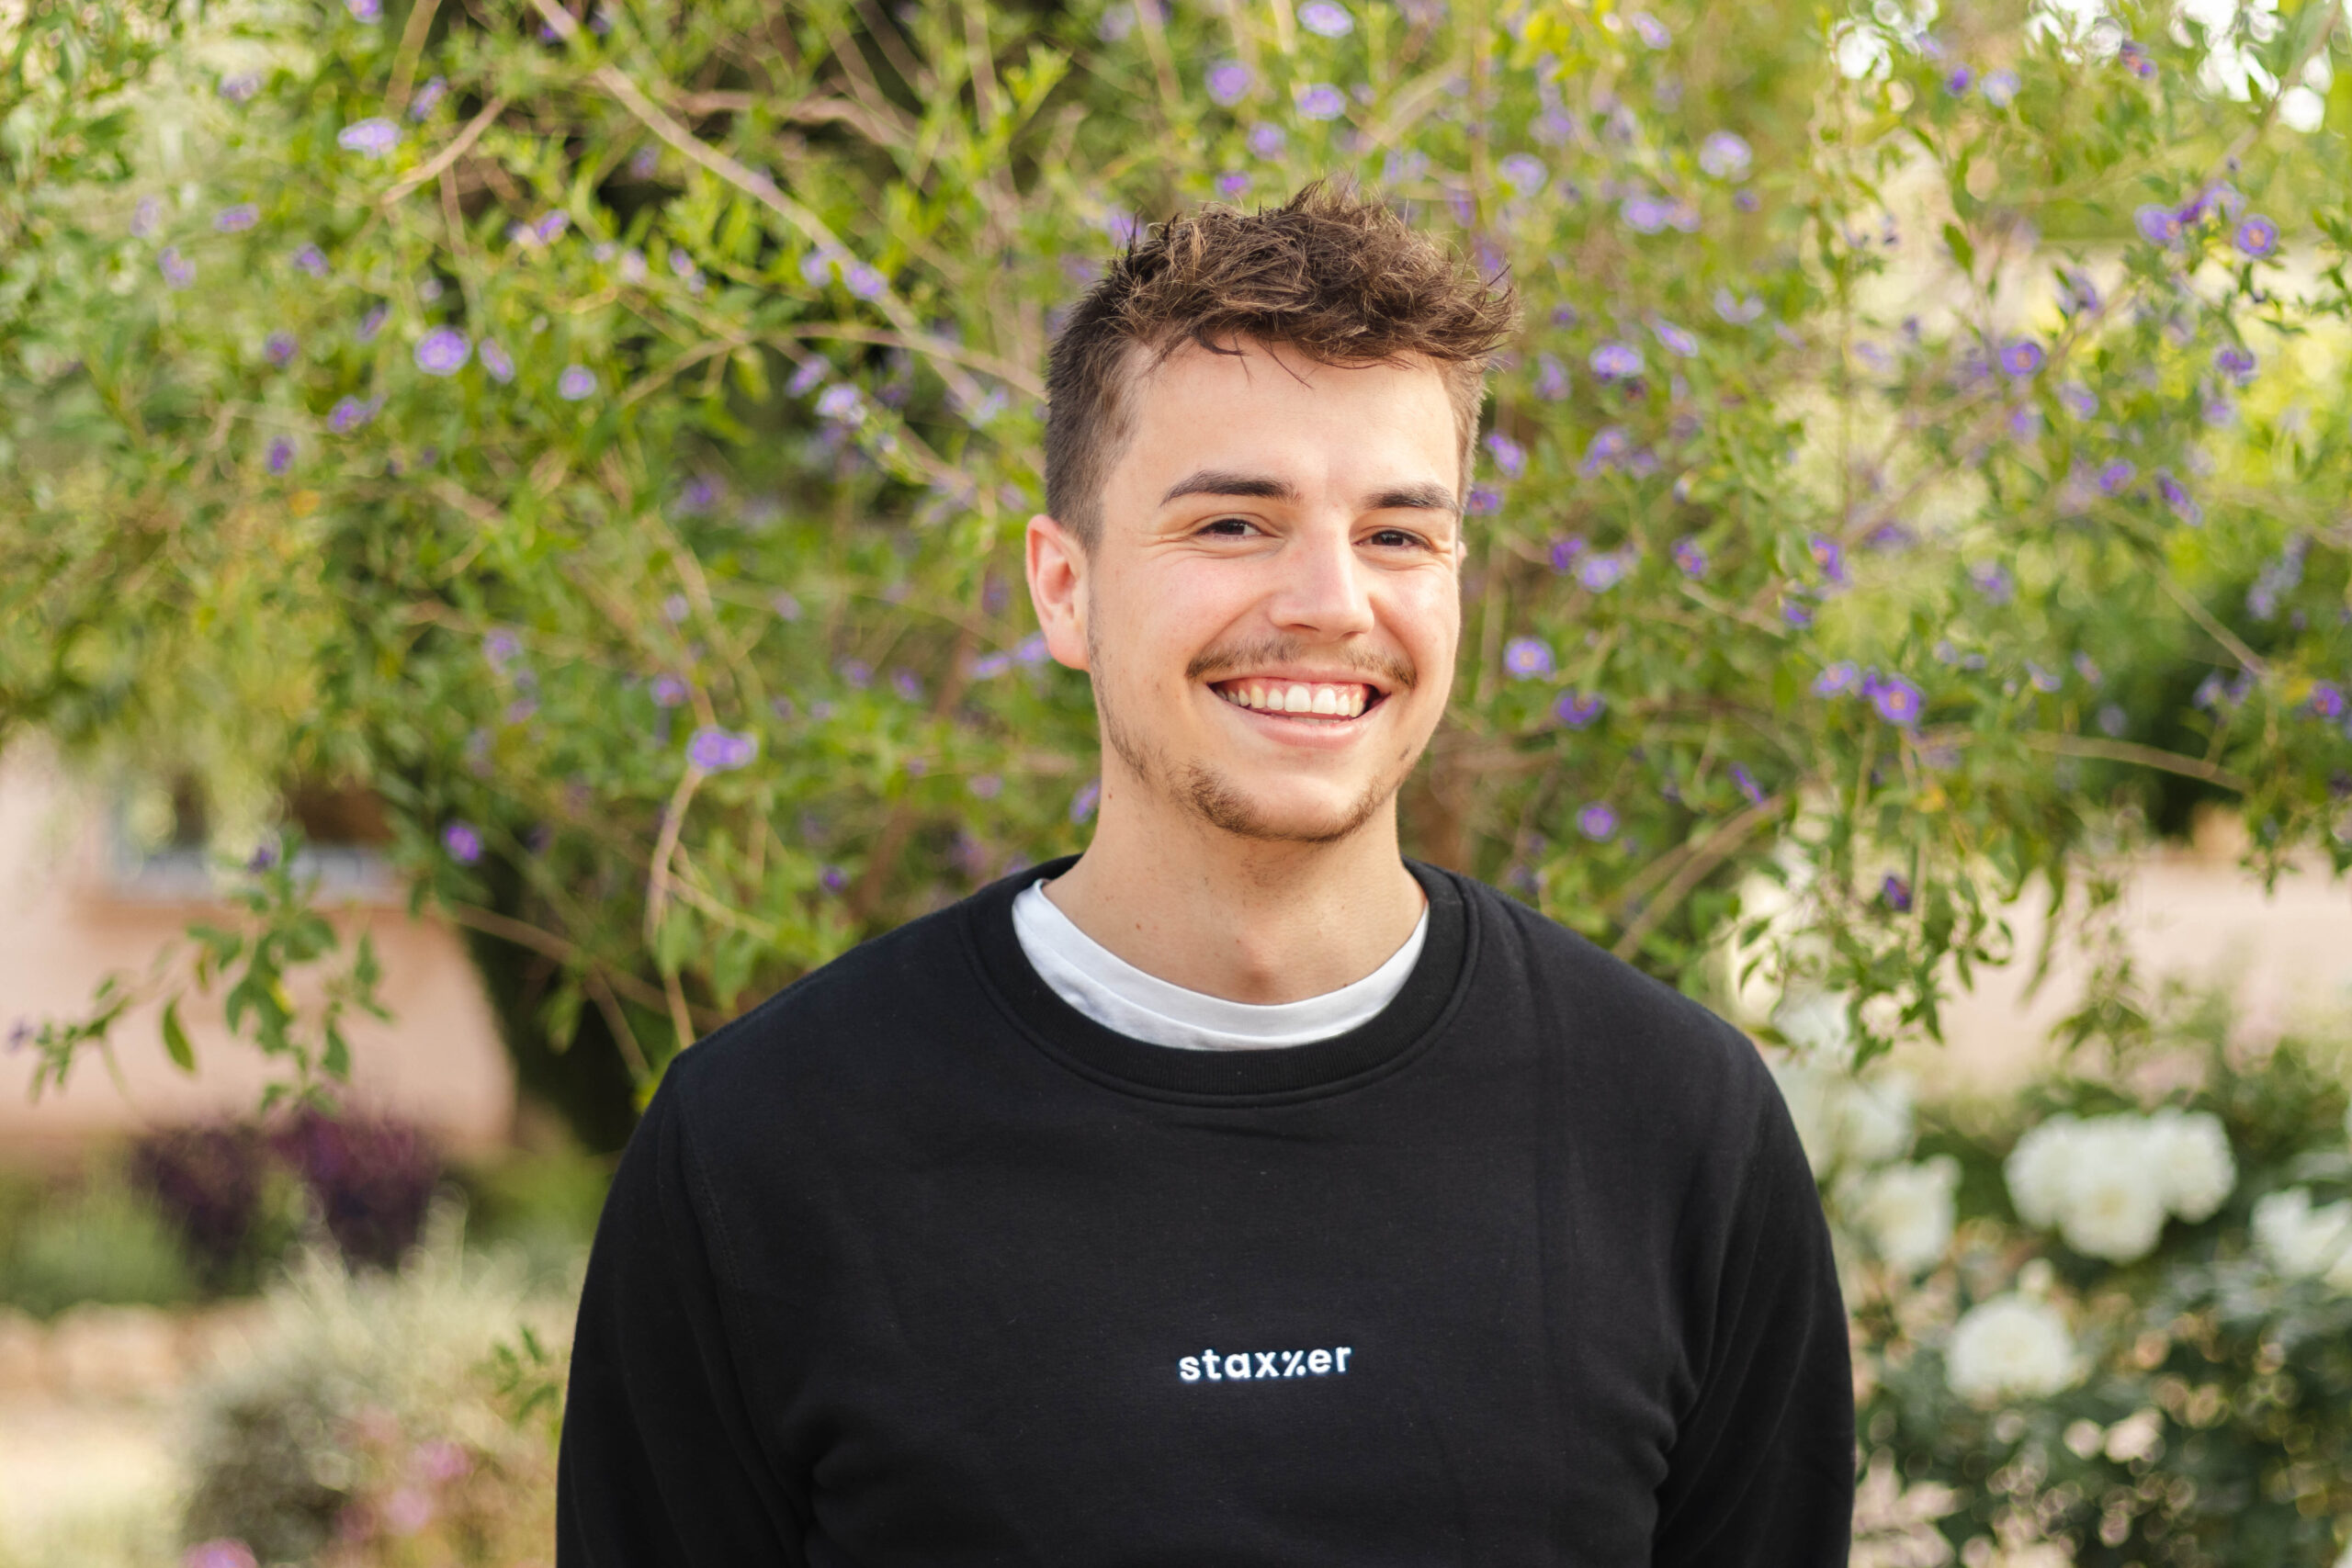 A young man in a black sweatshirt smiling in front of bushes.